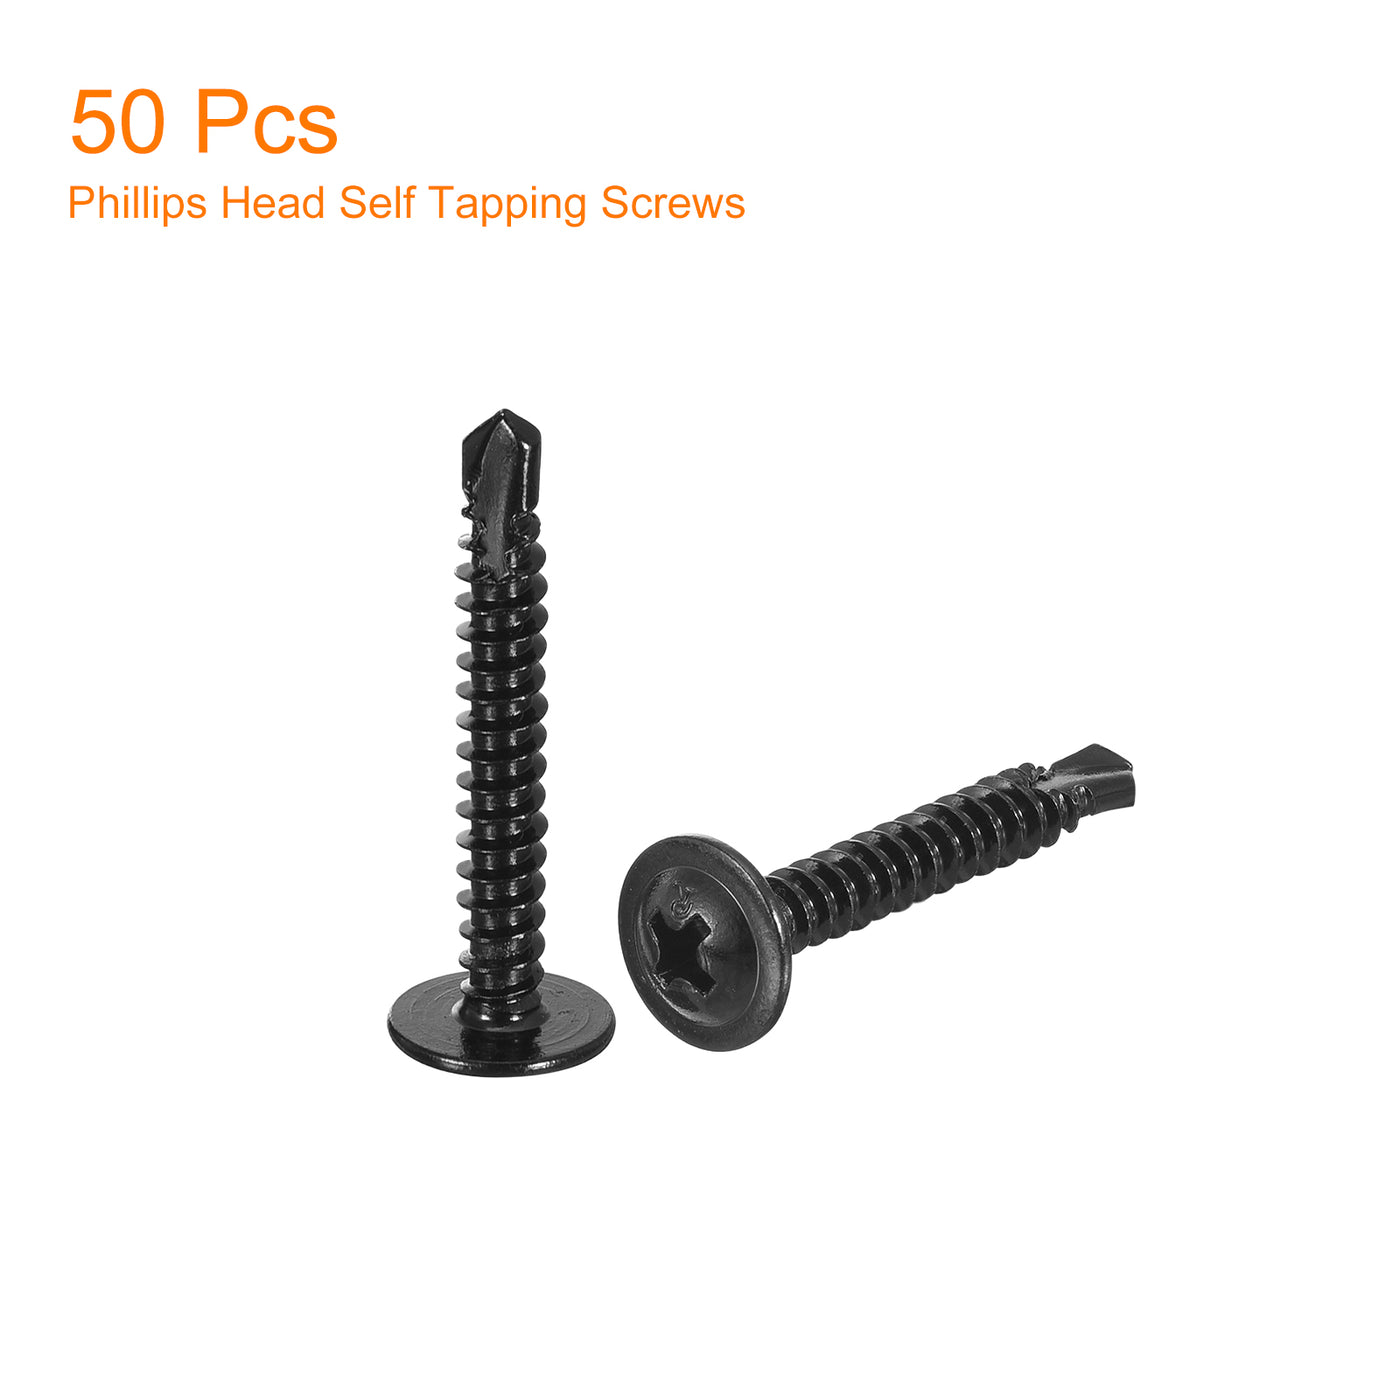 uxcell Uxcell Phillips Head Self Tapping Screws, 50pcs #8x1-1/4" Sheet Metal Screw